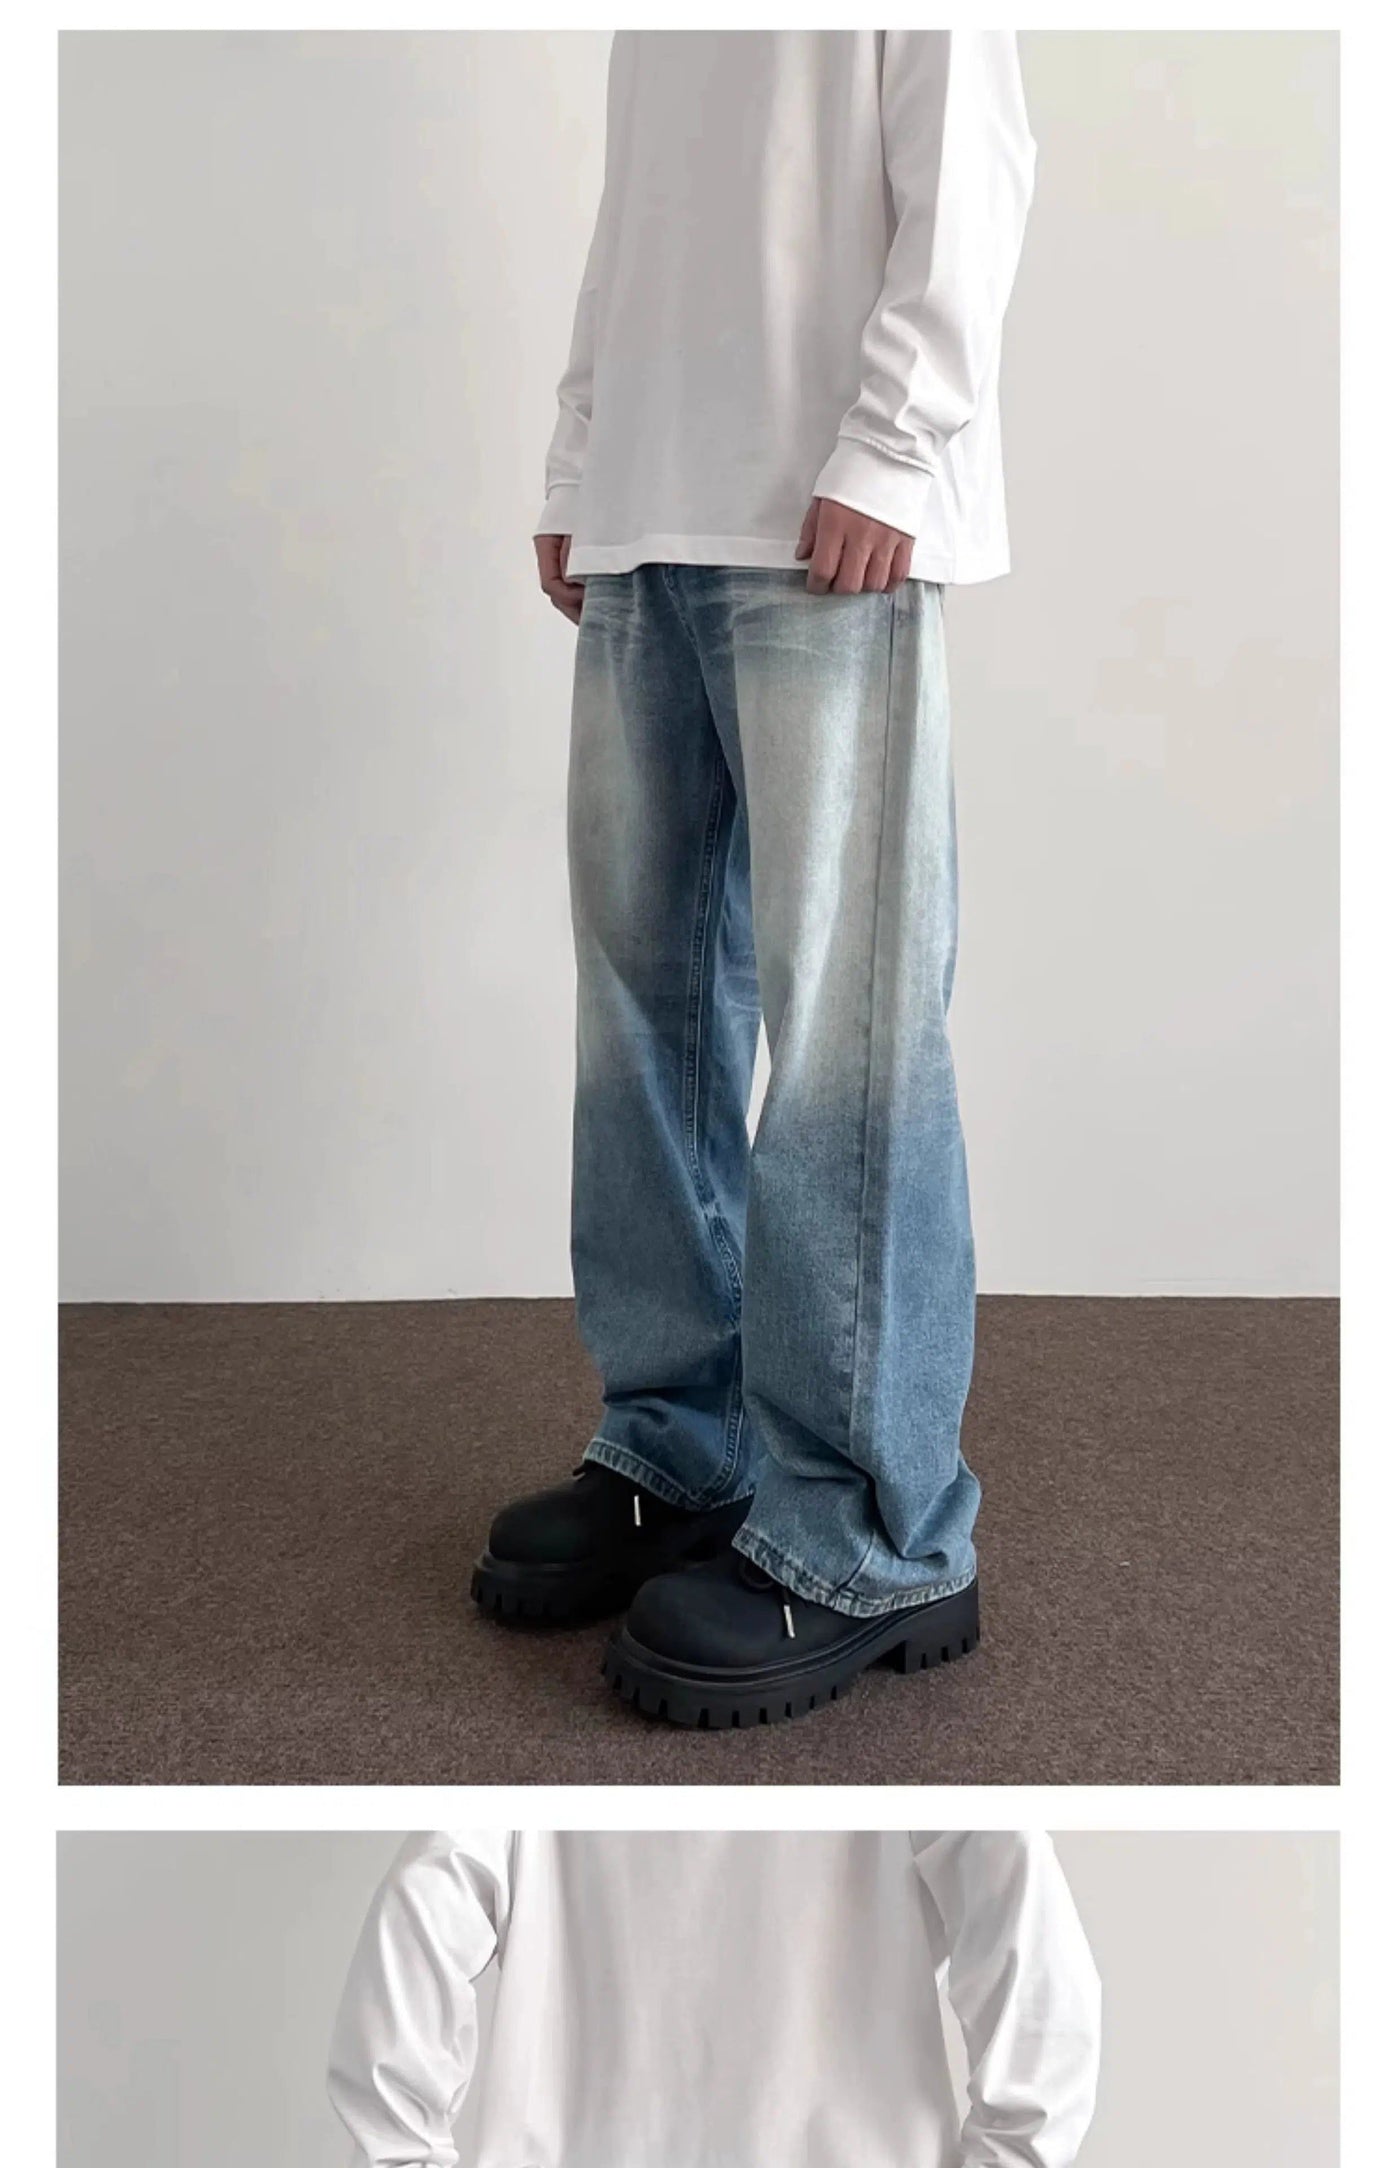 Faded Whiskers Emphasis Jeans Korean Street Fashion Jeans By A PUEE Shop Online at OH Vault